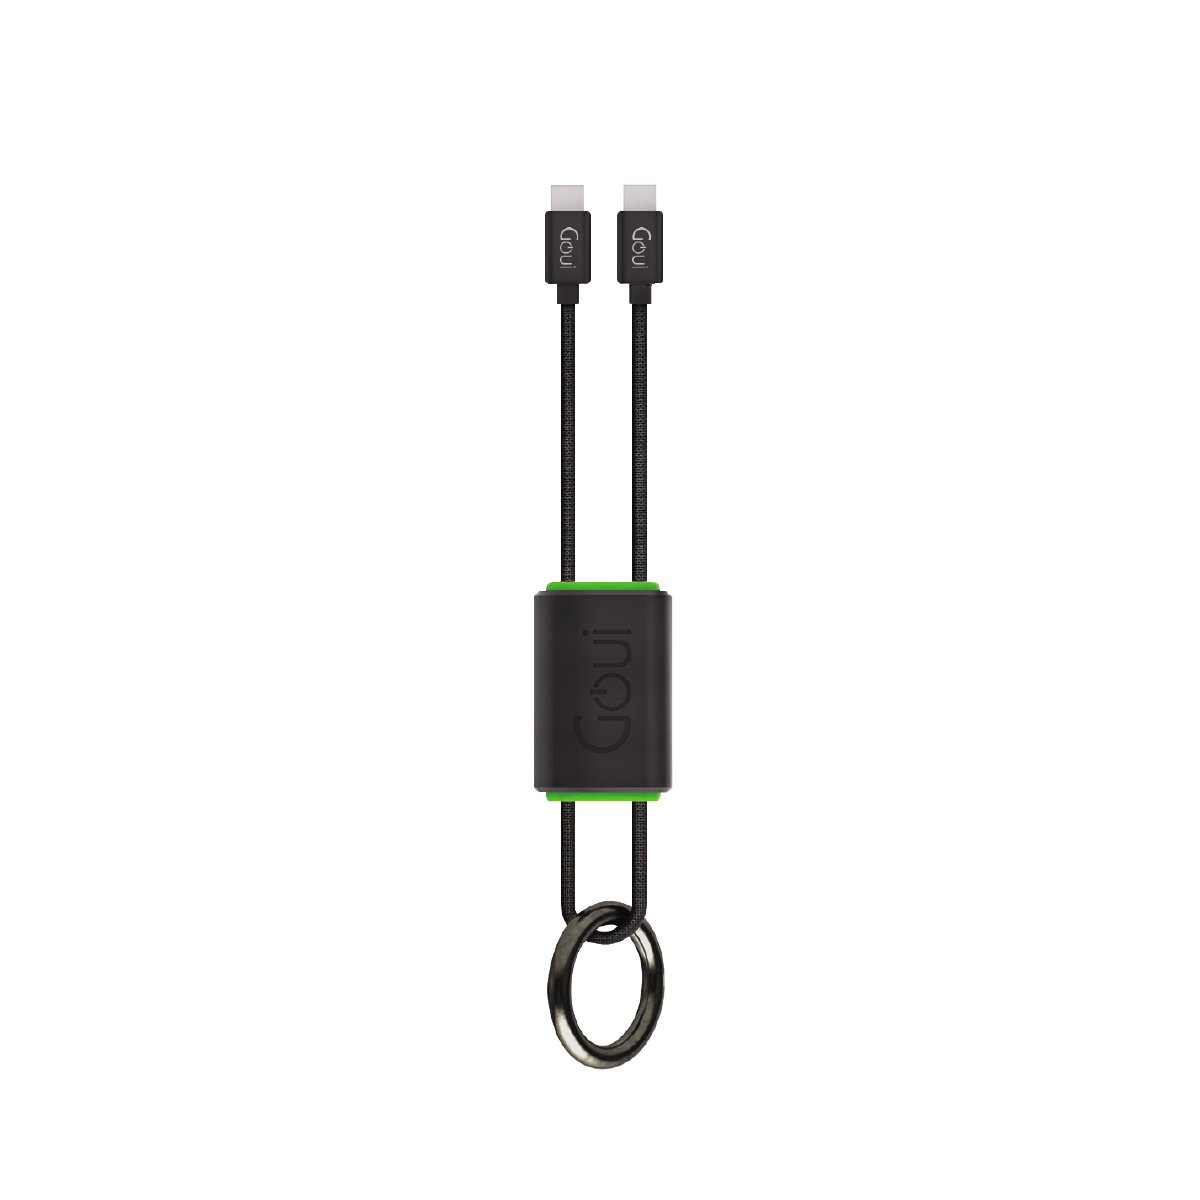 Goui- Lock Type-C to C key chain cable